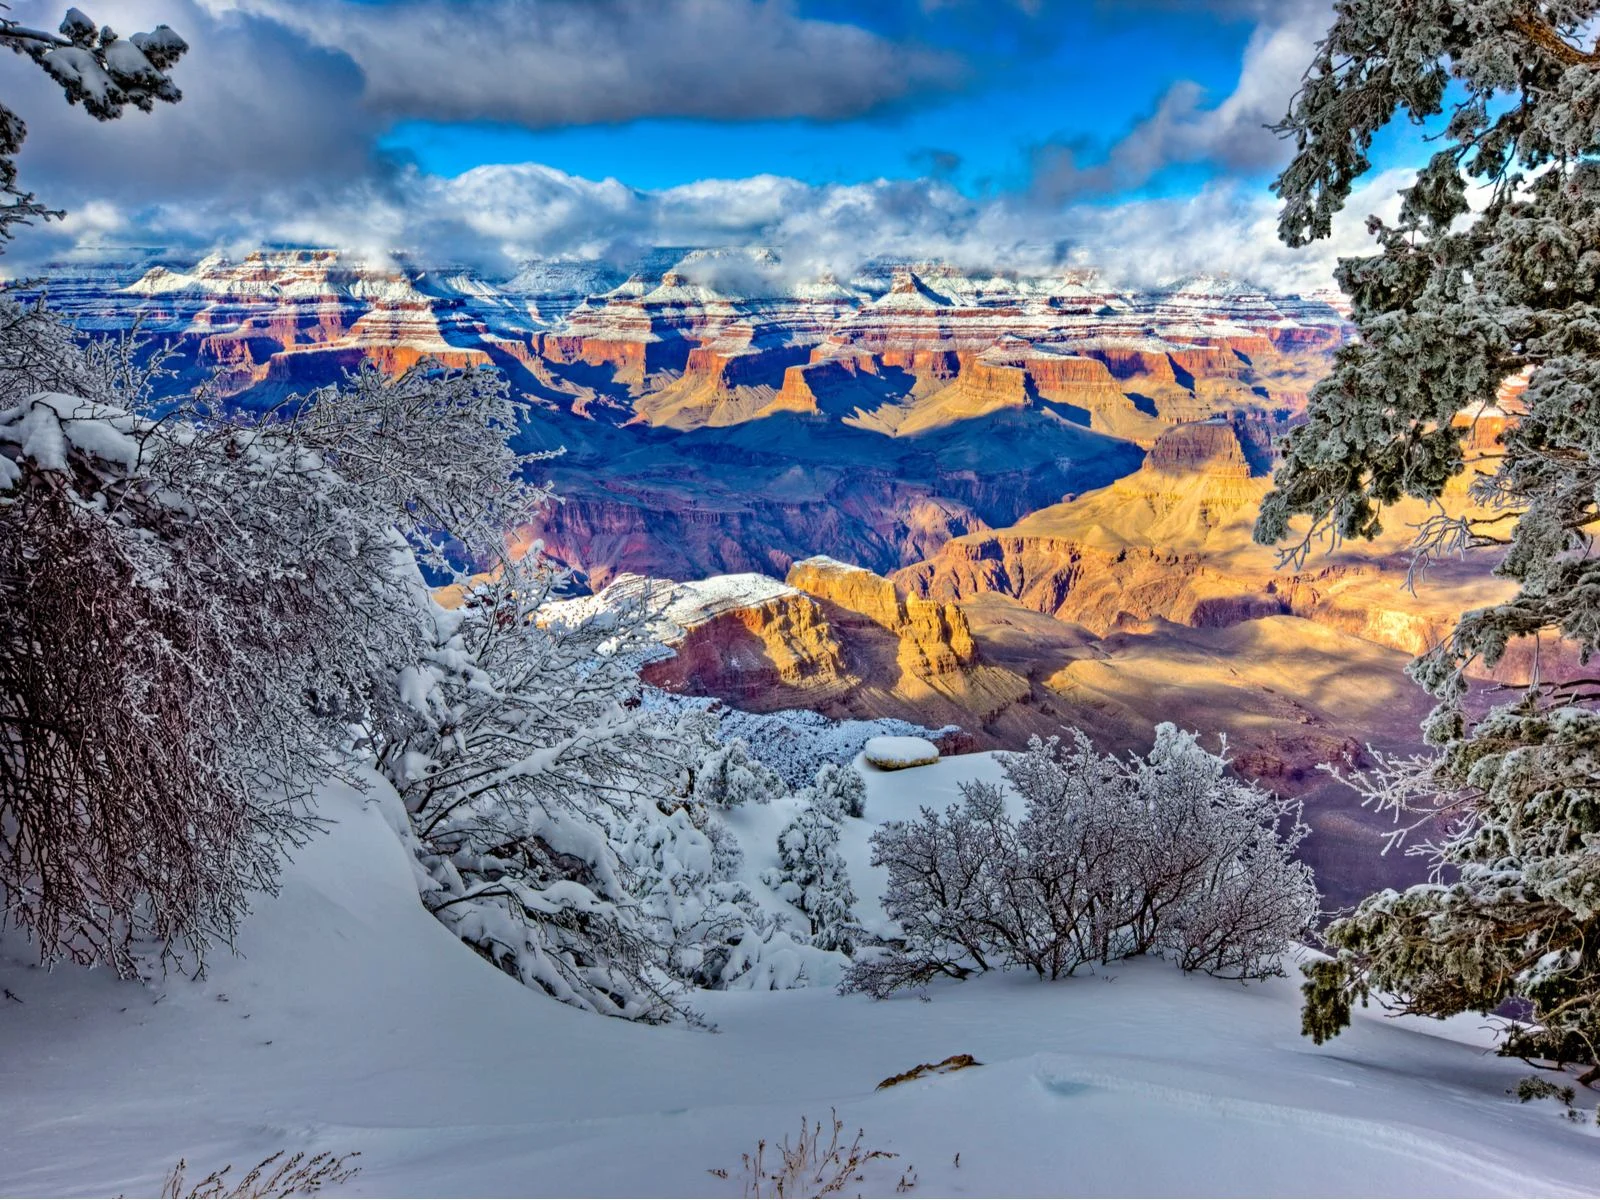 Image of the Grand Canyon pictured during the cheapest time to visit, the Winter